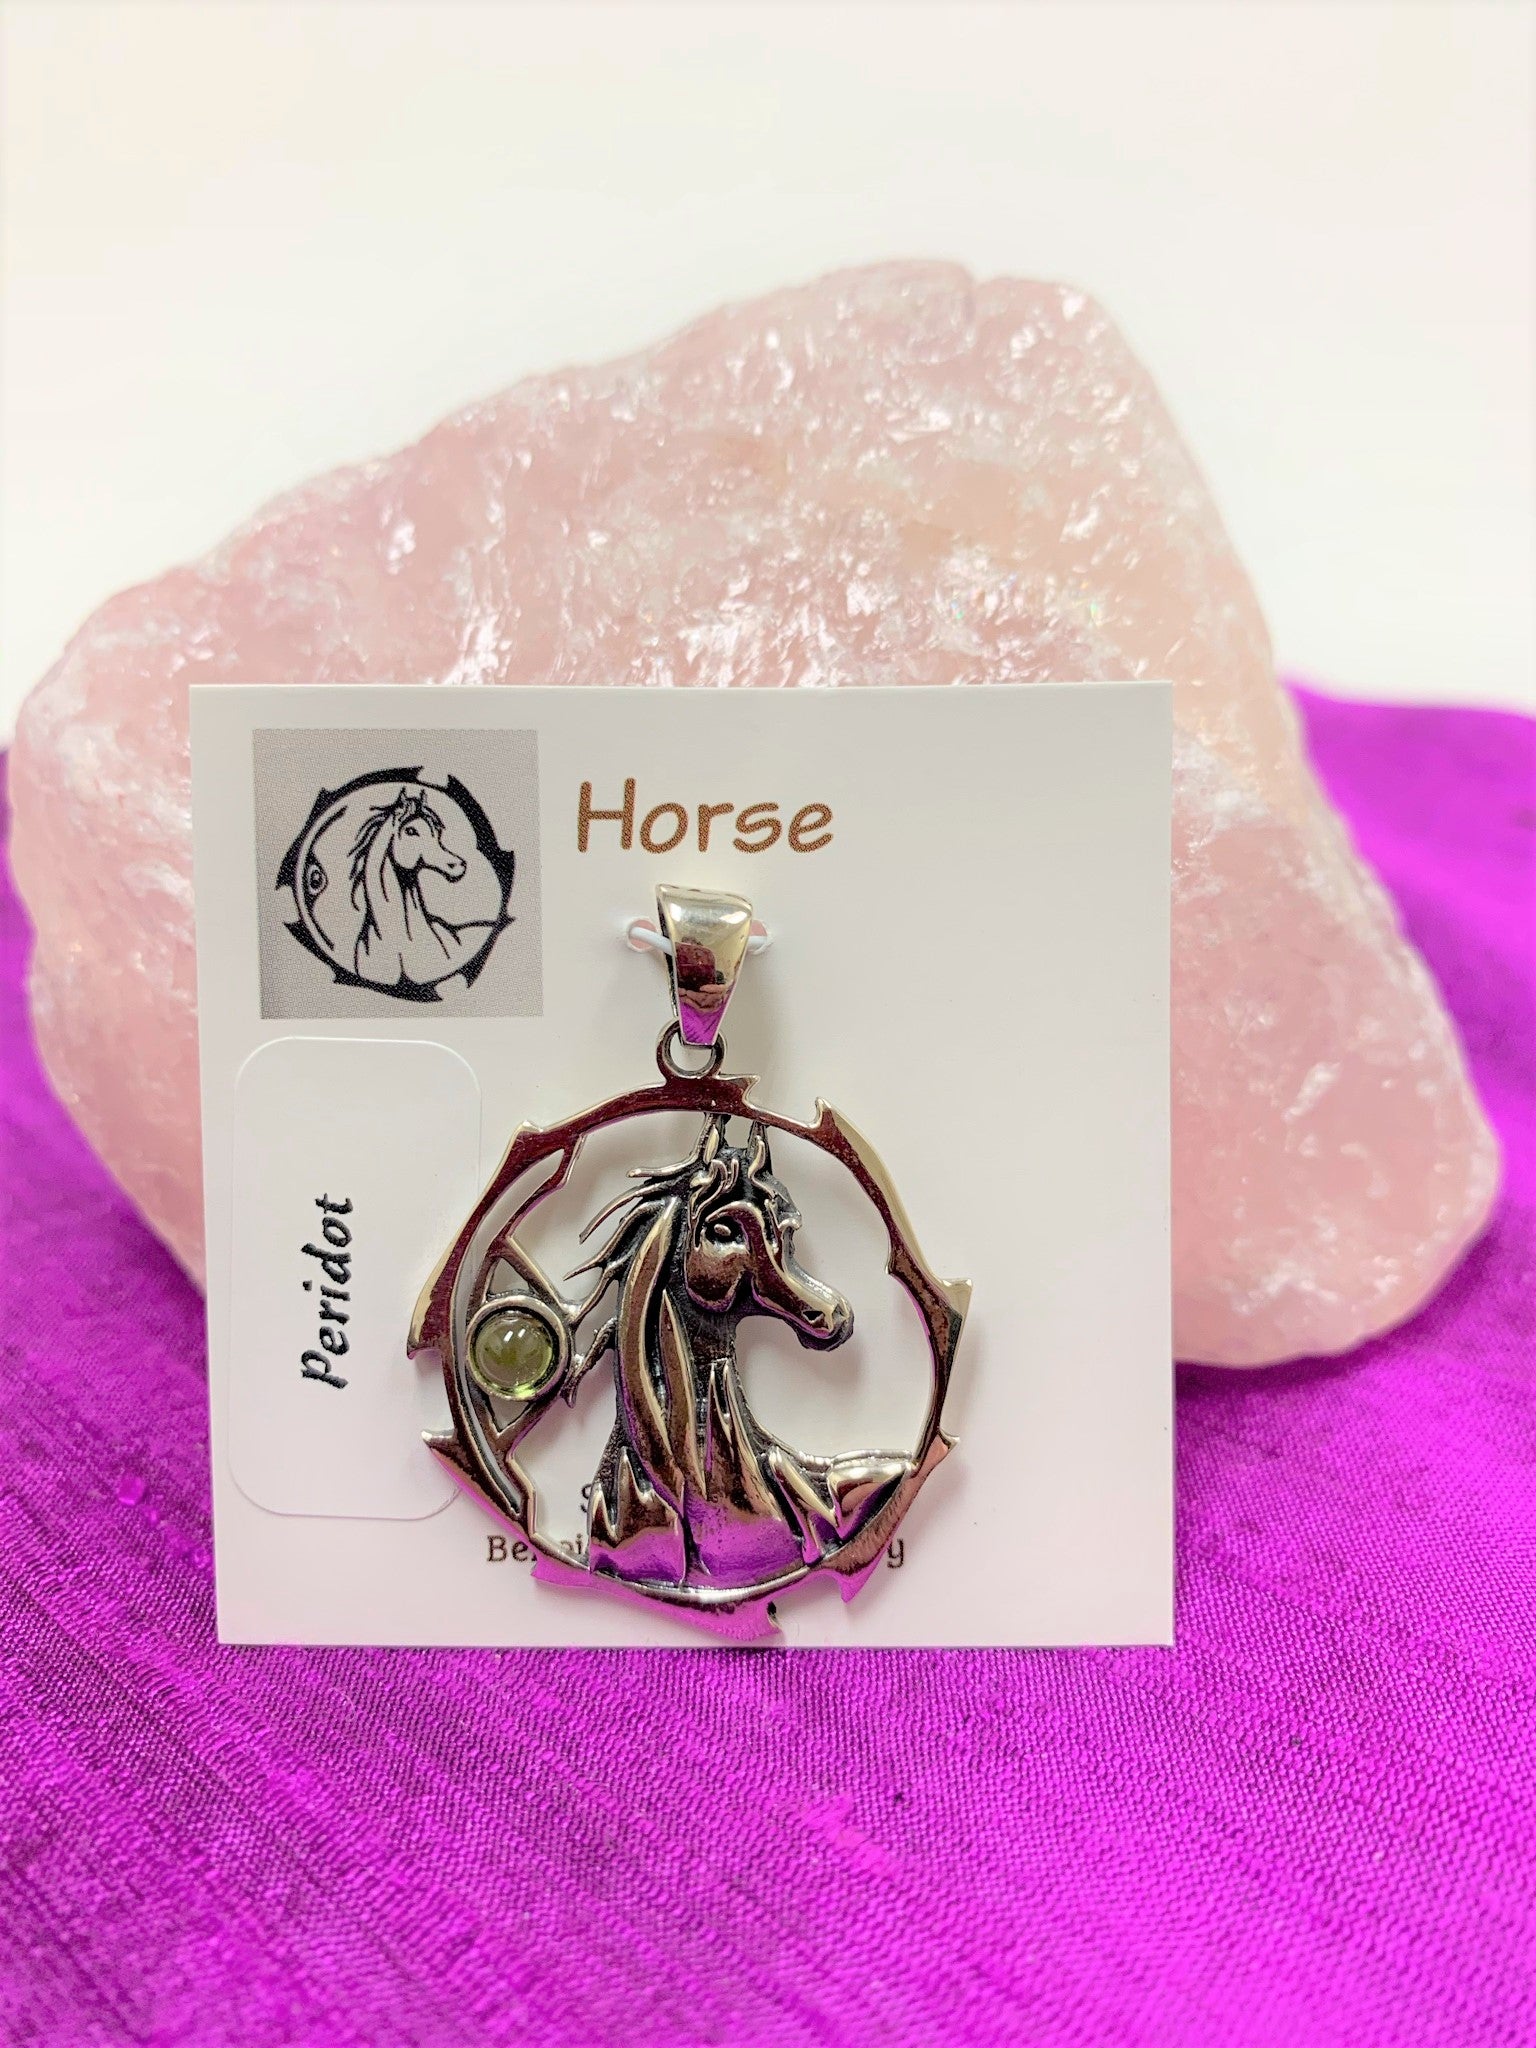 Sterling silver horse spirit animal pendant, accented with a peridot gemstone. Horse is set within an open, stylized circle with the gemstone on the side (horse and circle are sterling). Wear your spirit animal's energy so you will have it with you everywhere you go! Pendant only - necklace chain not included. 